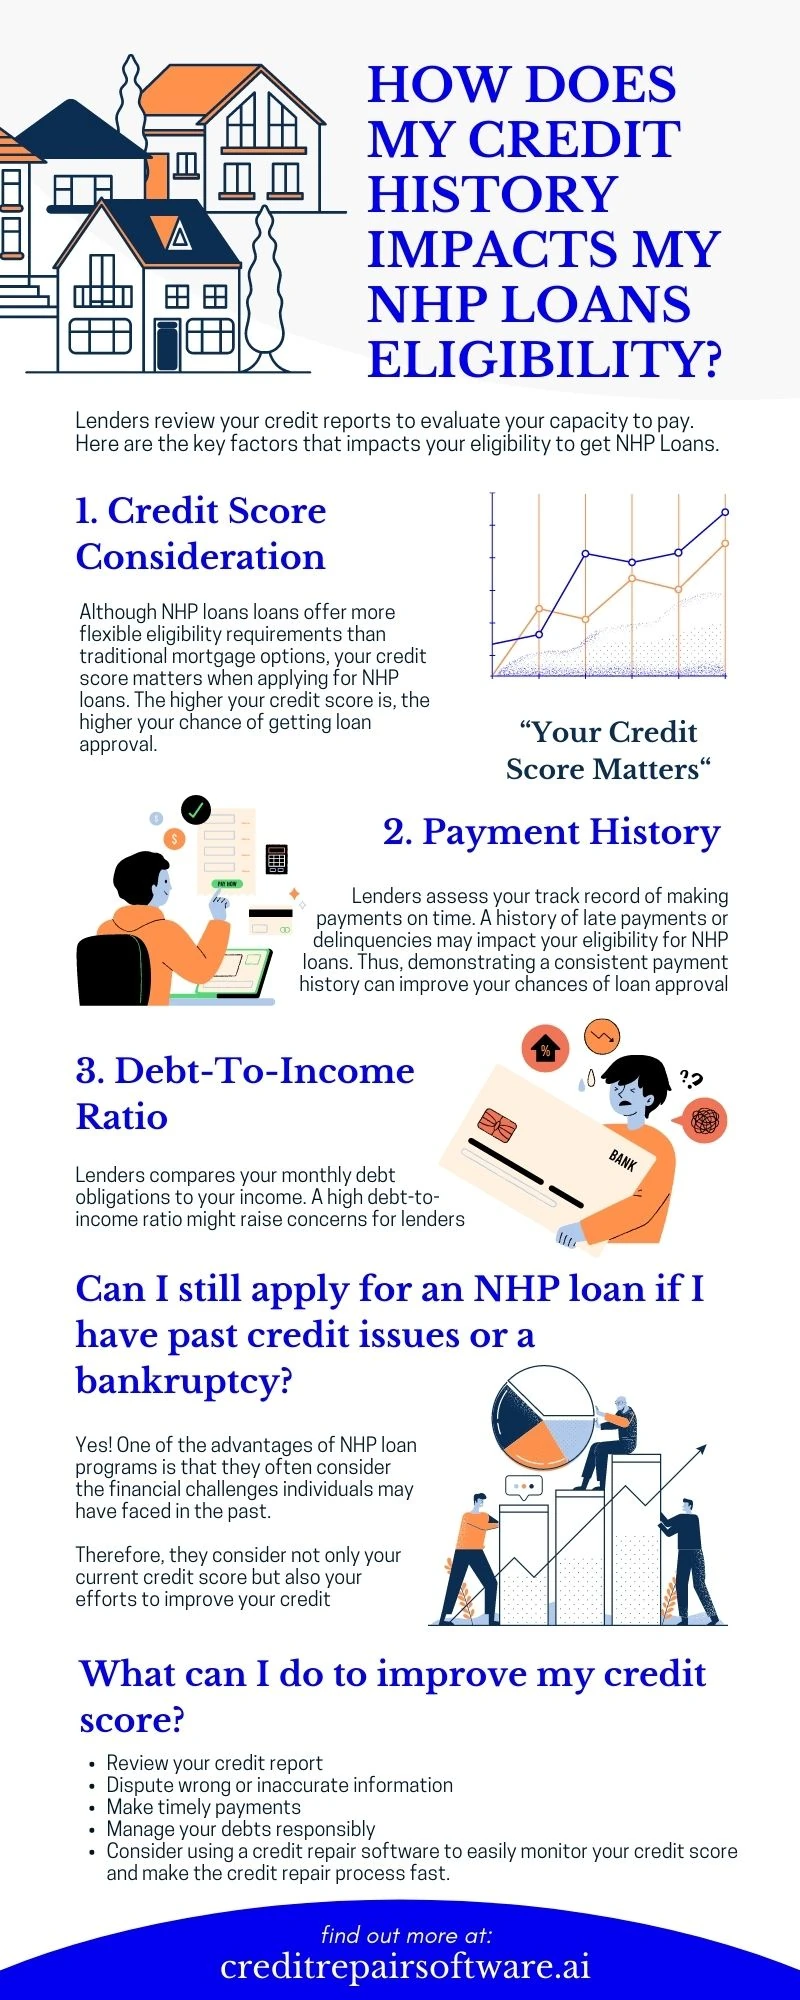 How Does My Credit History Impacts My NHP Loans Eligibility infographic